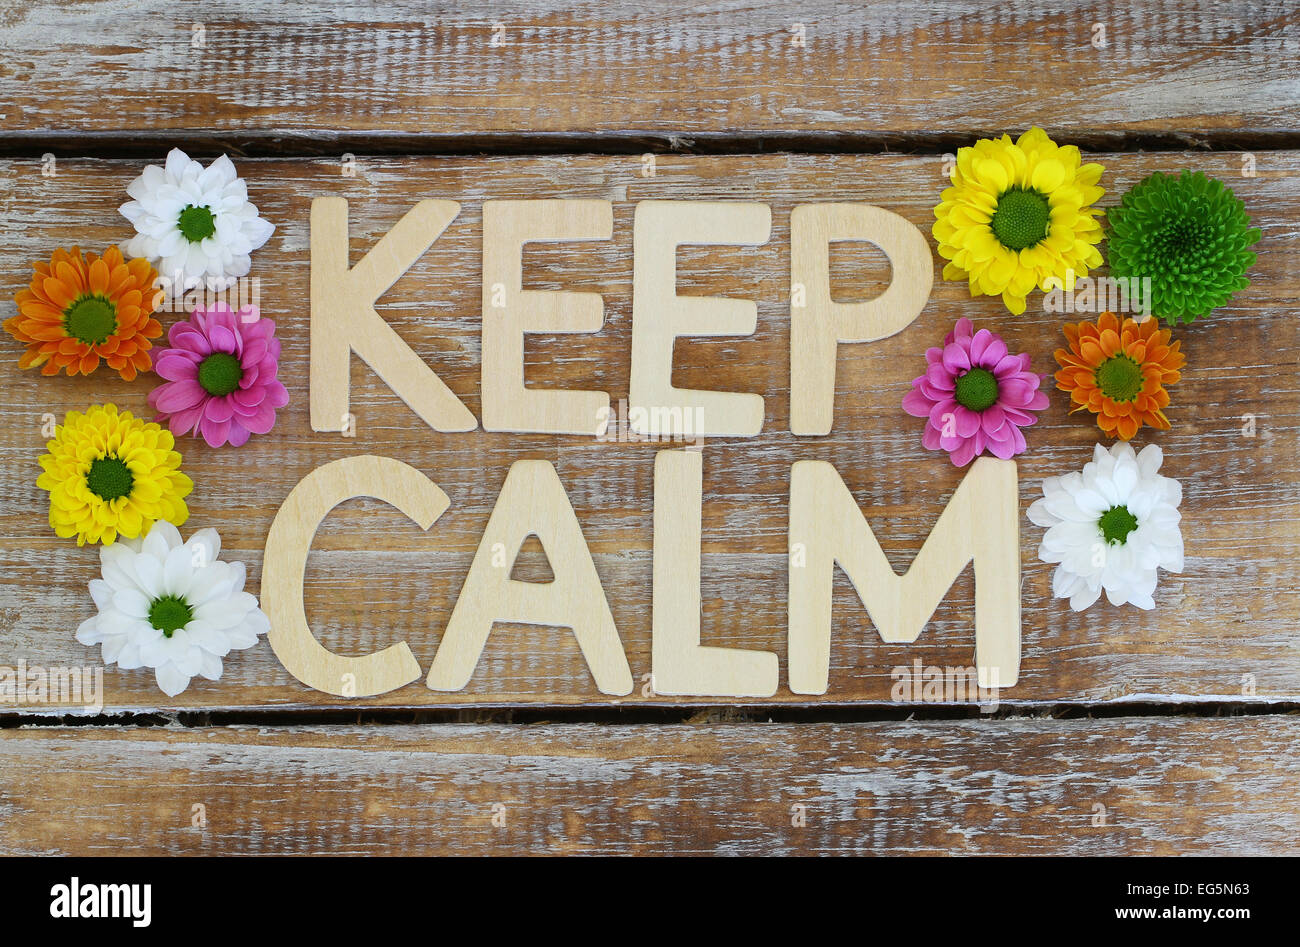 Keep calm written with wooden letters and Santini flowers Stock Photo